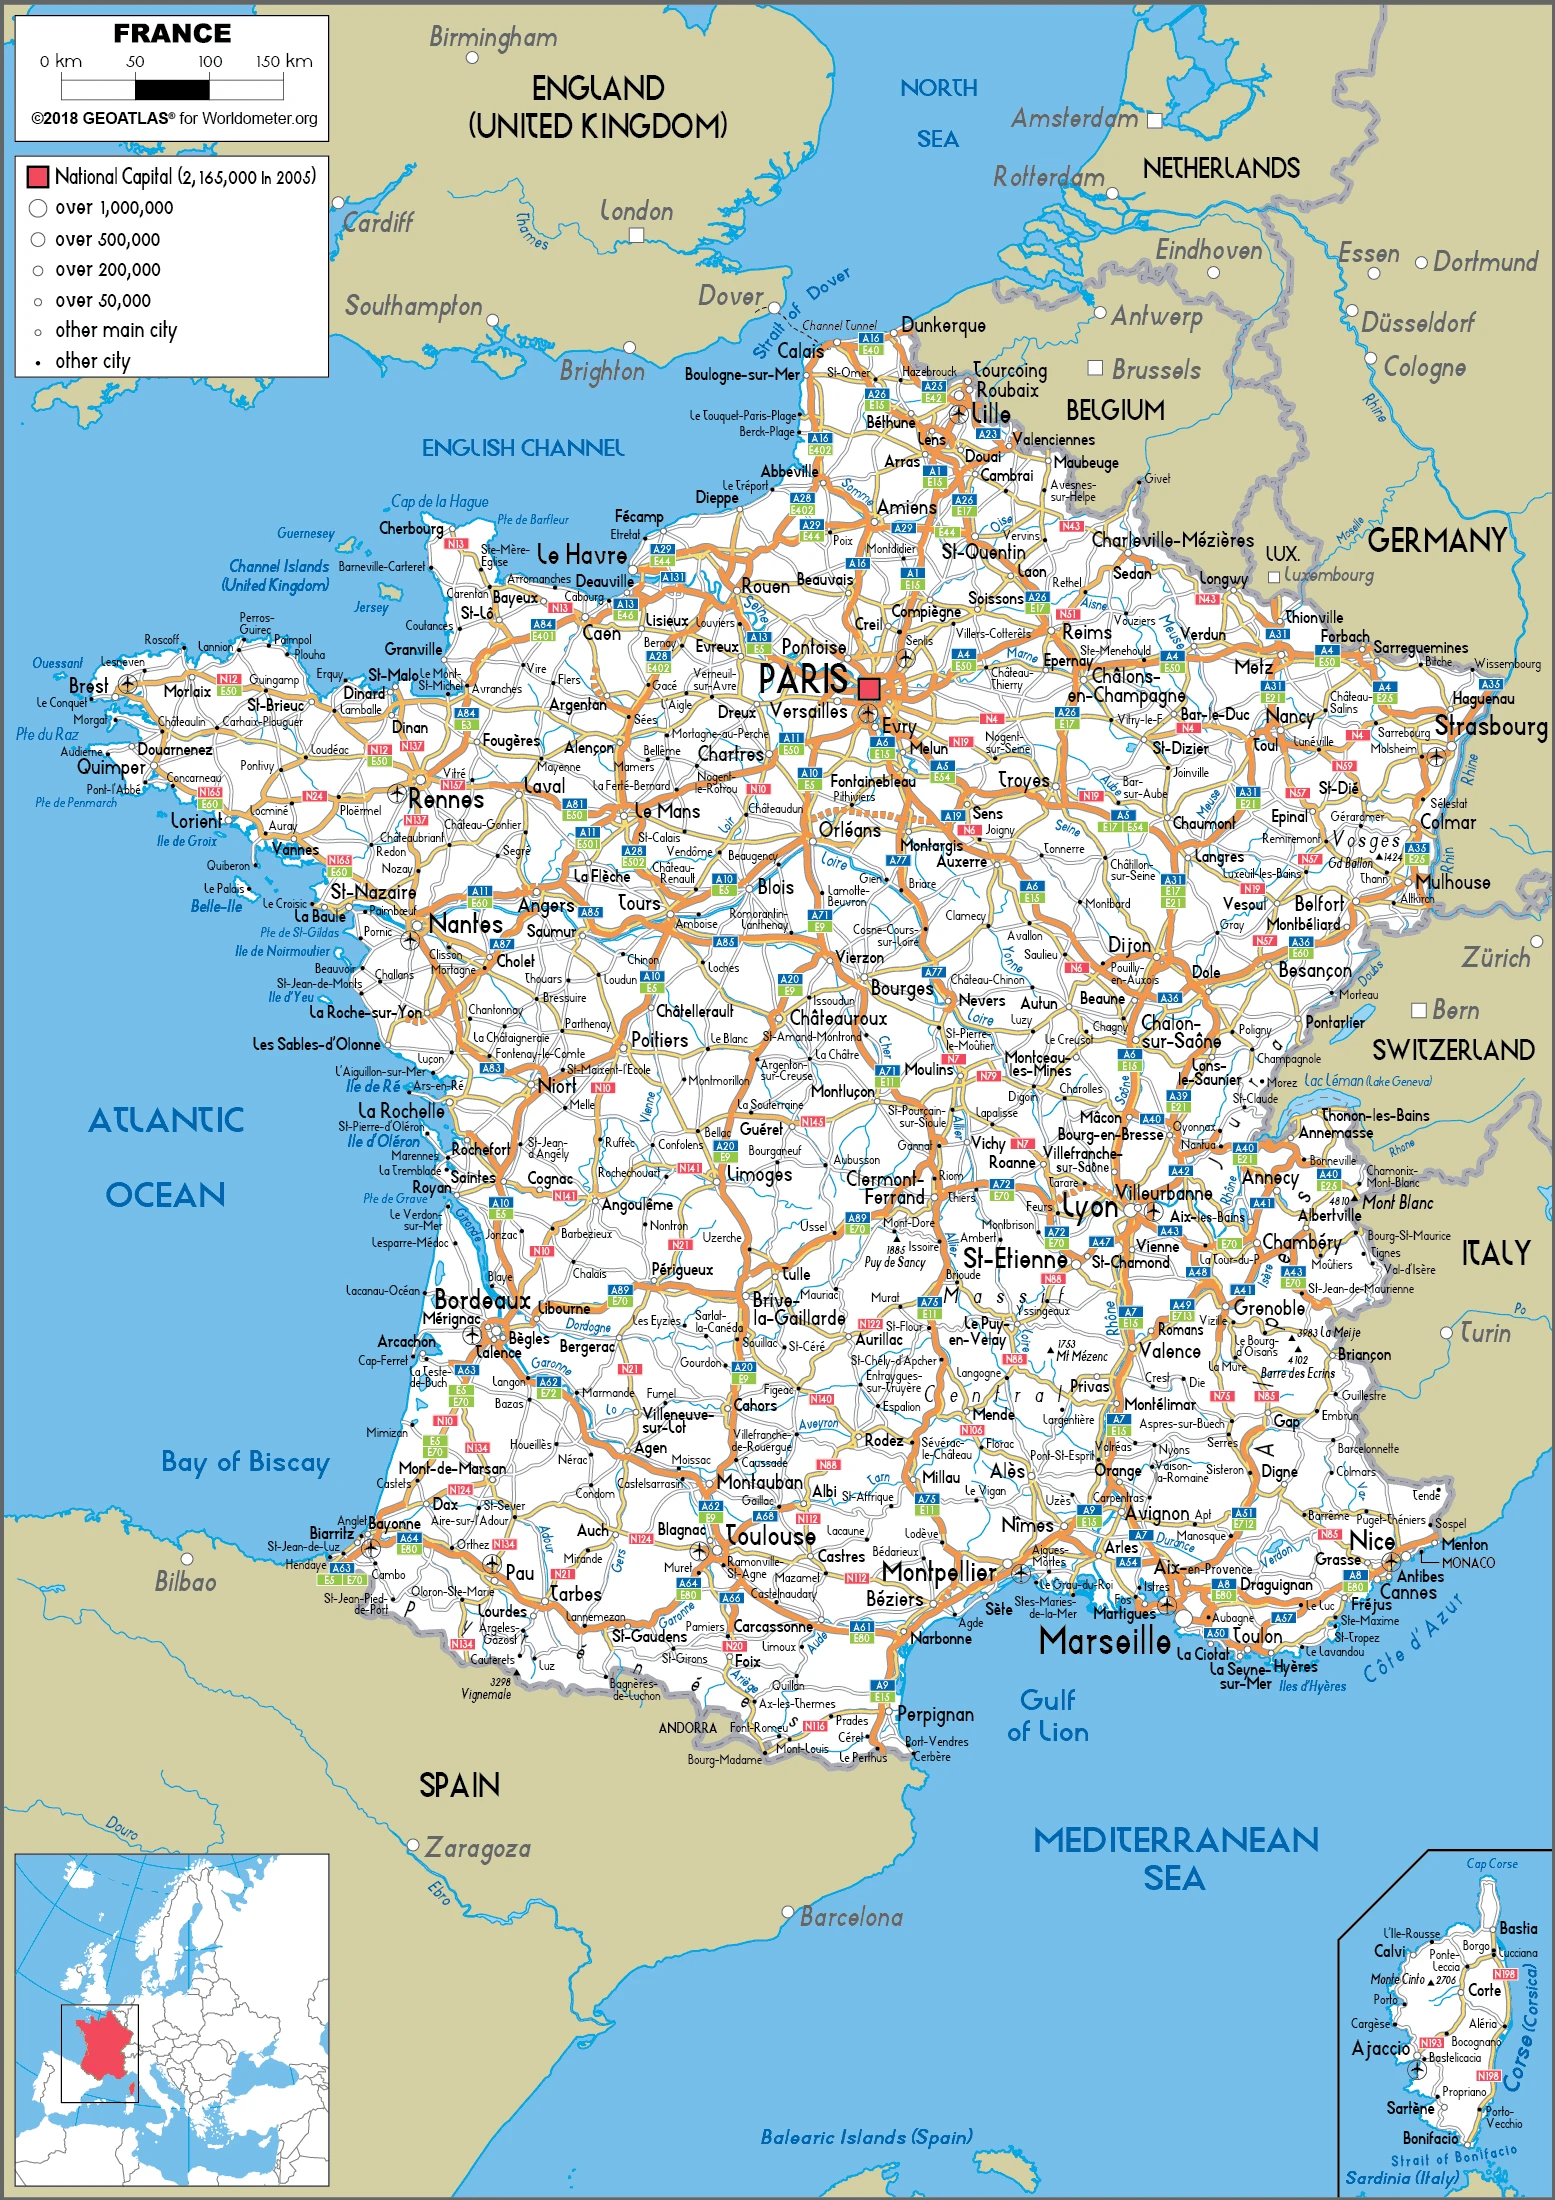 The route plan of the French roadways.